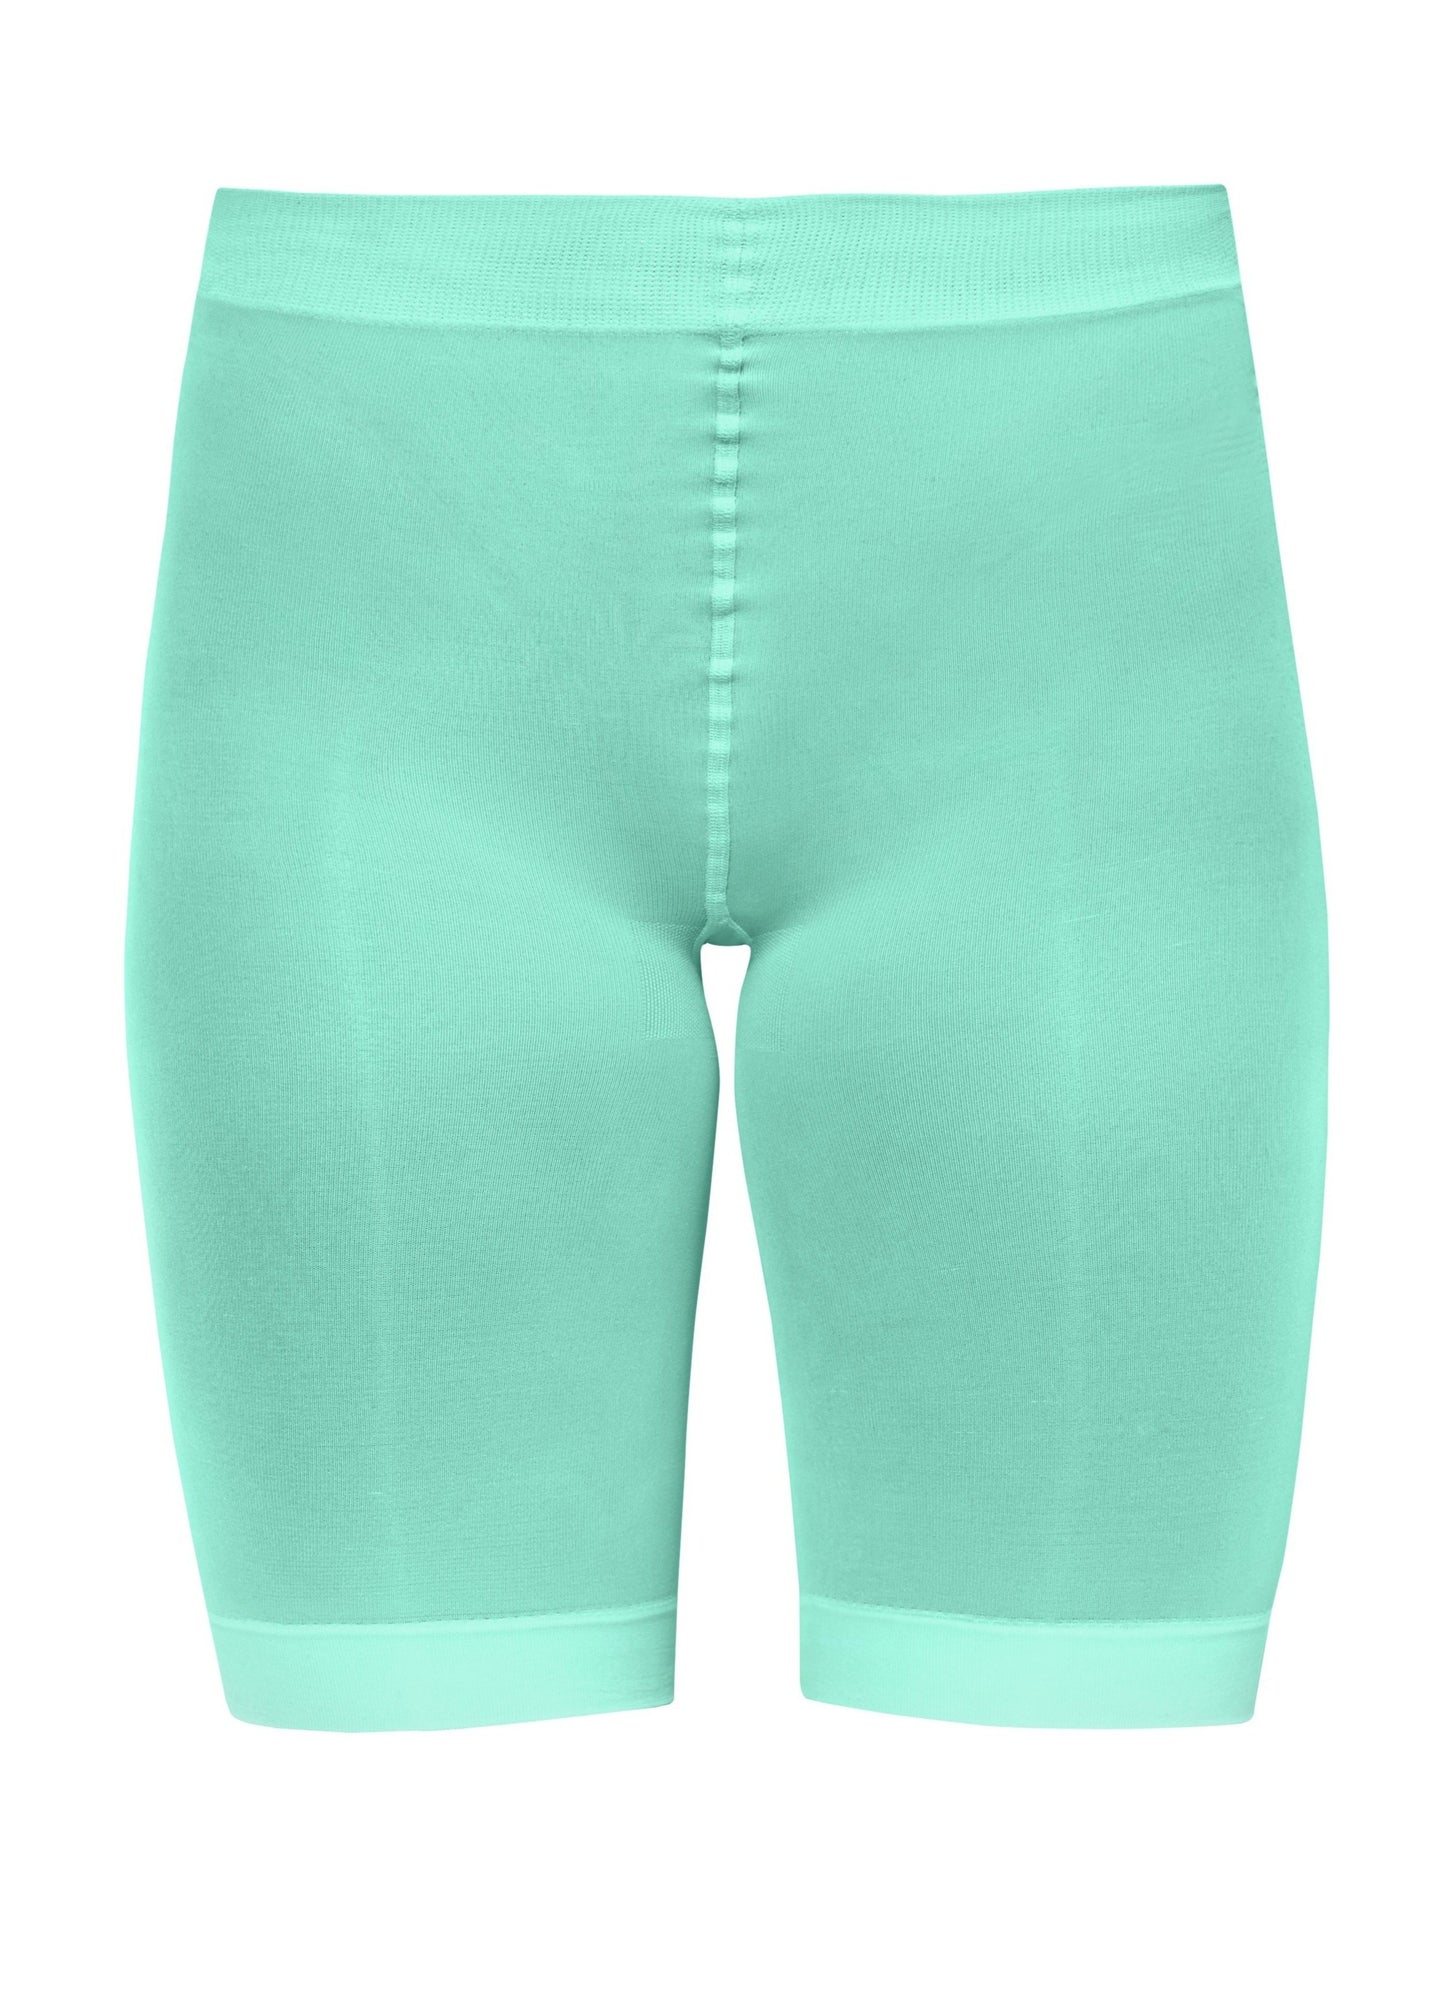 Sneaky Fox Microfibre Shorts - Pastel mint green soft matte opaque knee length bicycle short tights with cotton gusset and flat seams.